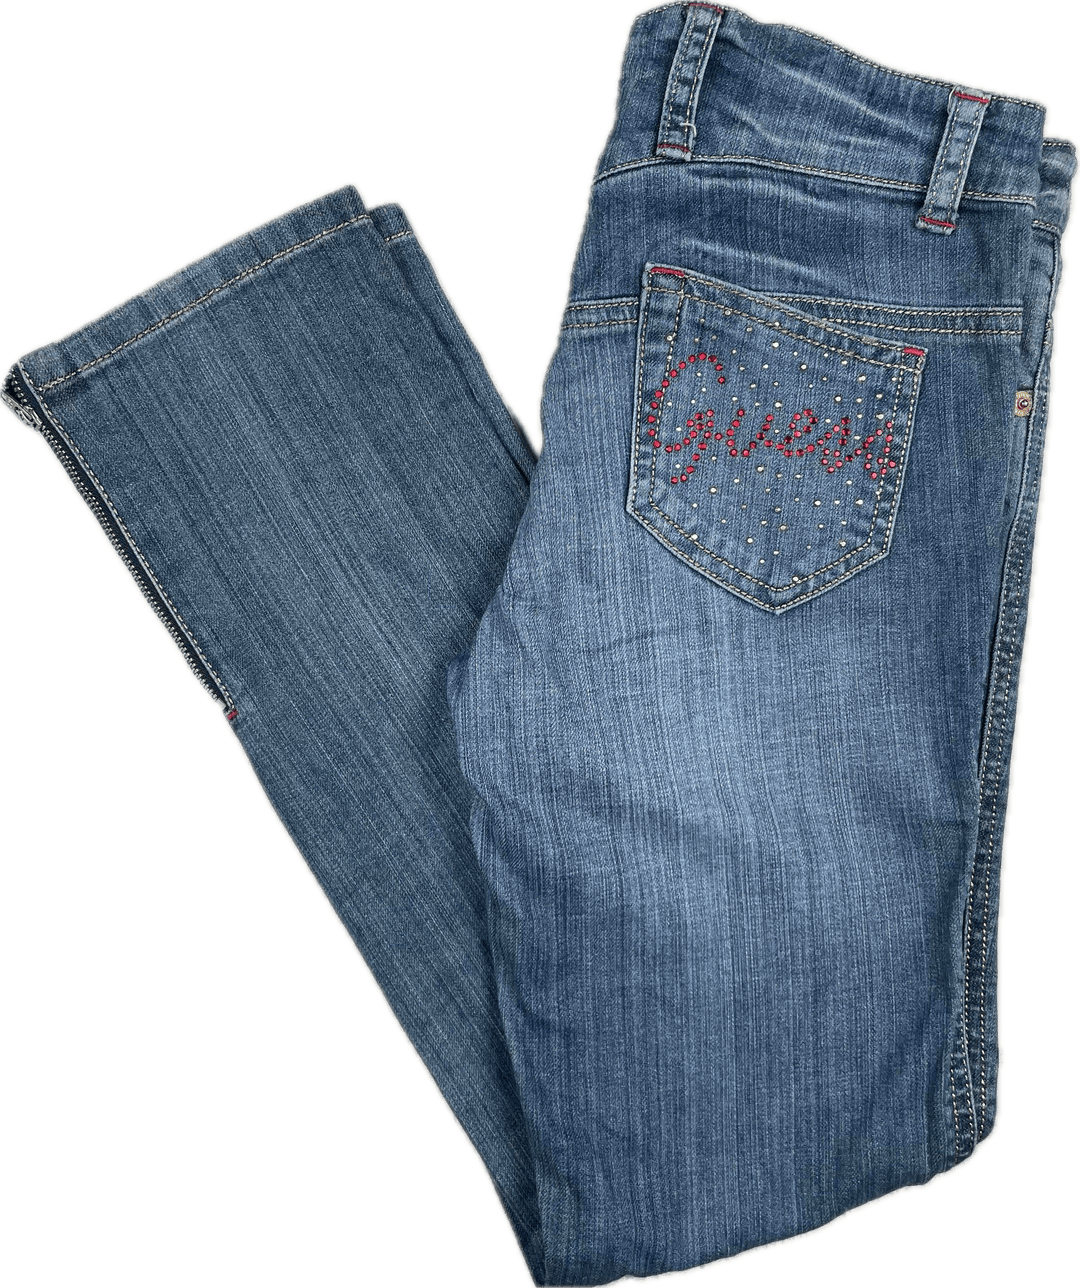 Guess Girls Crystal Logo Pocket Ankle Zip Jeans - Size 10 - Jean Pool